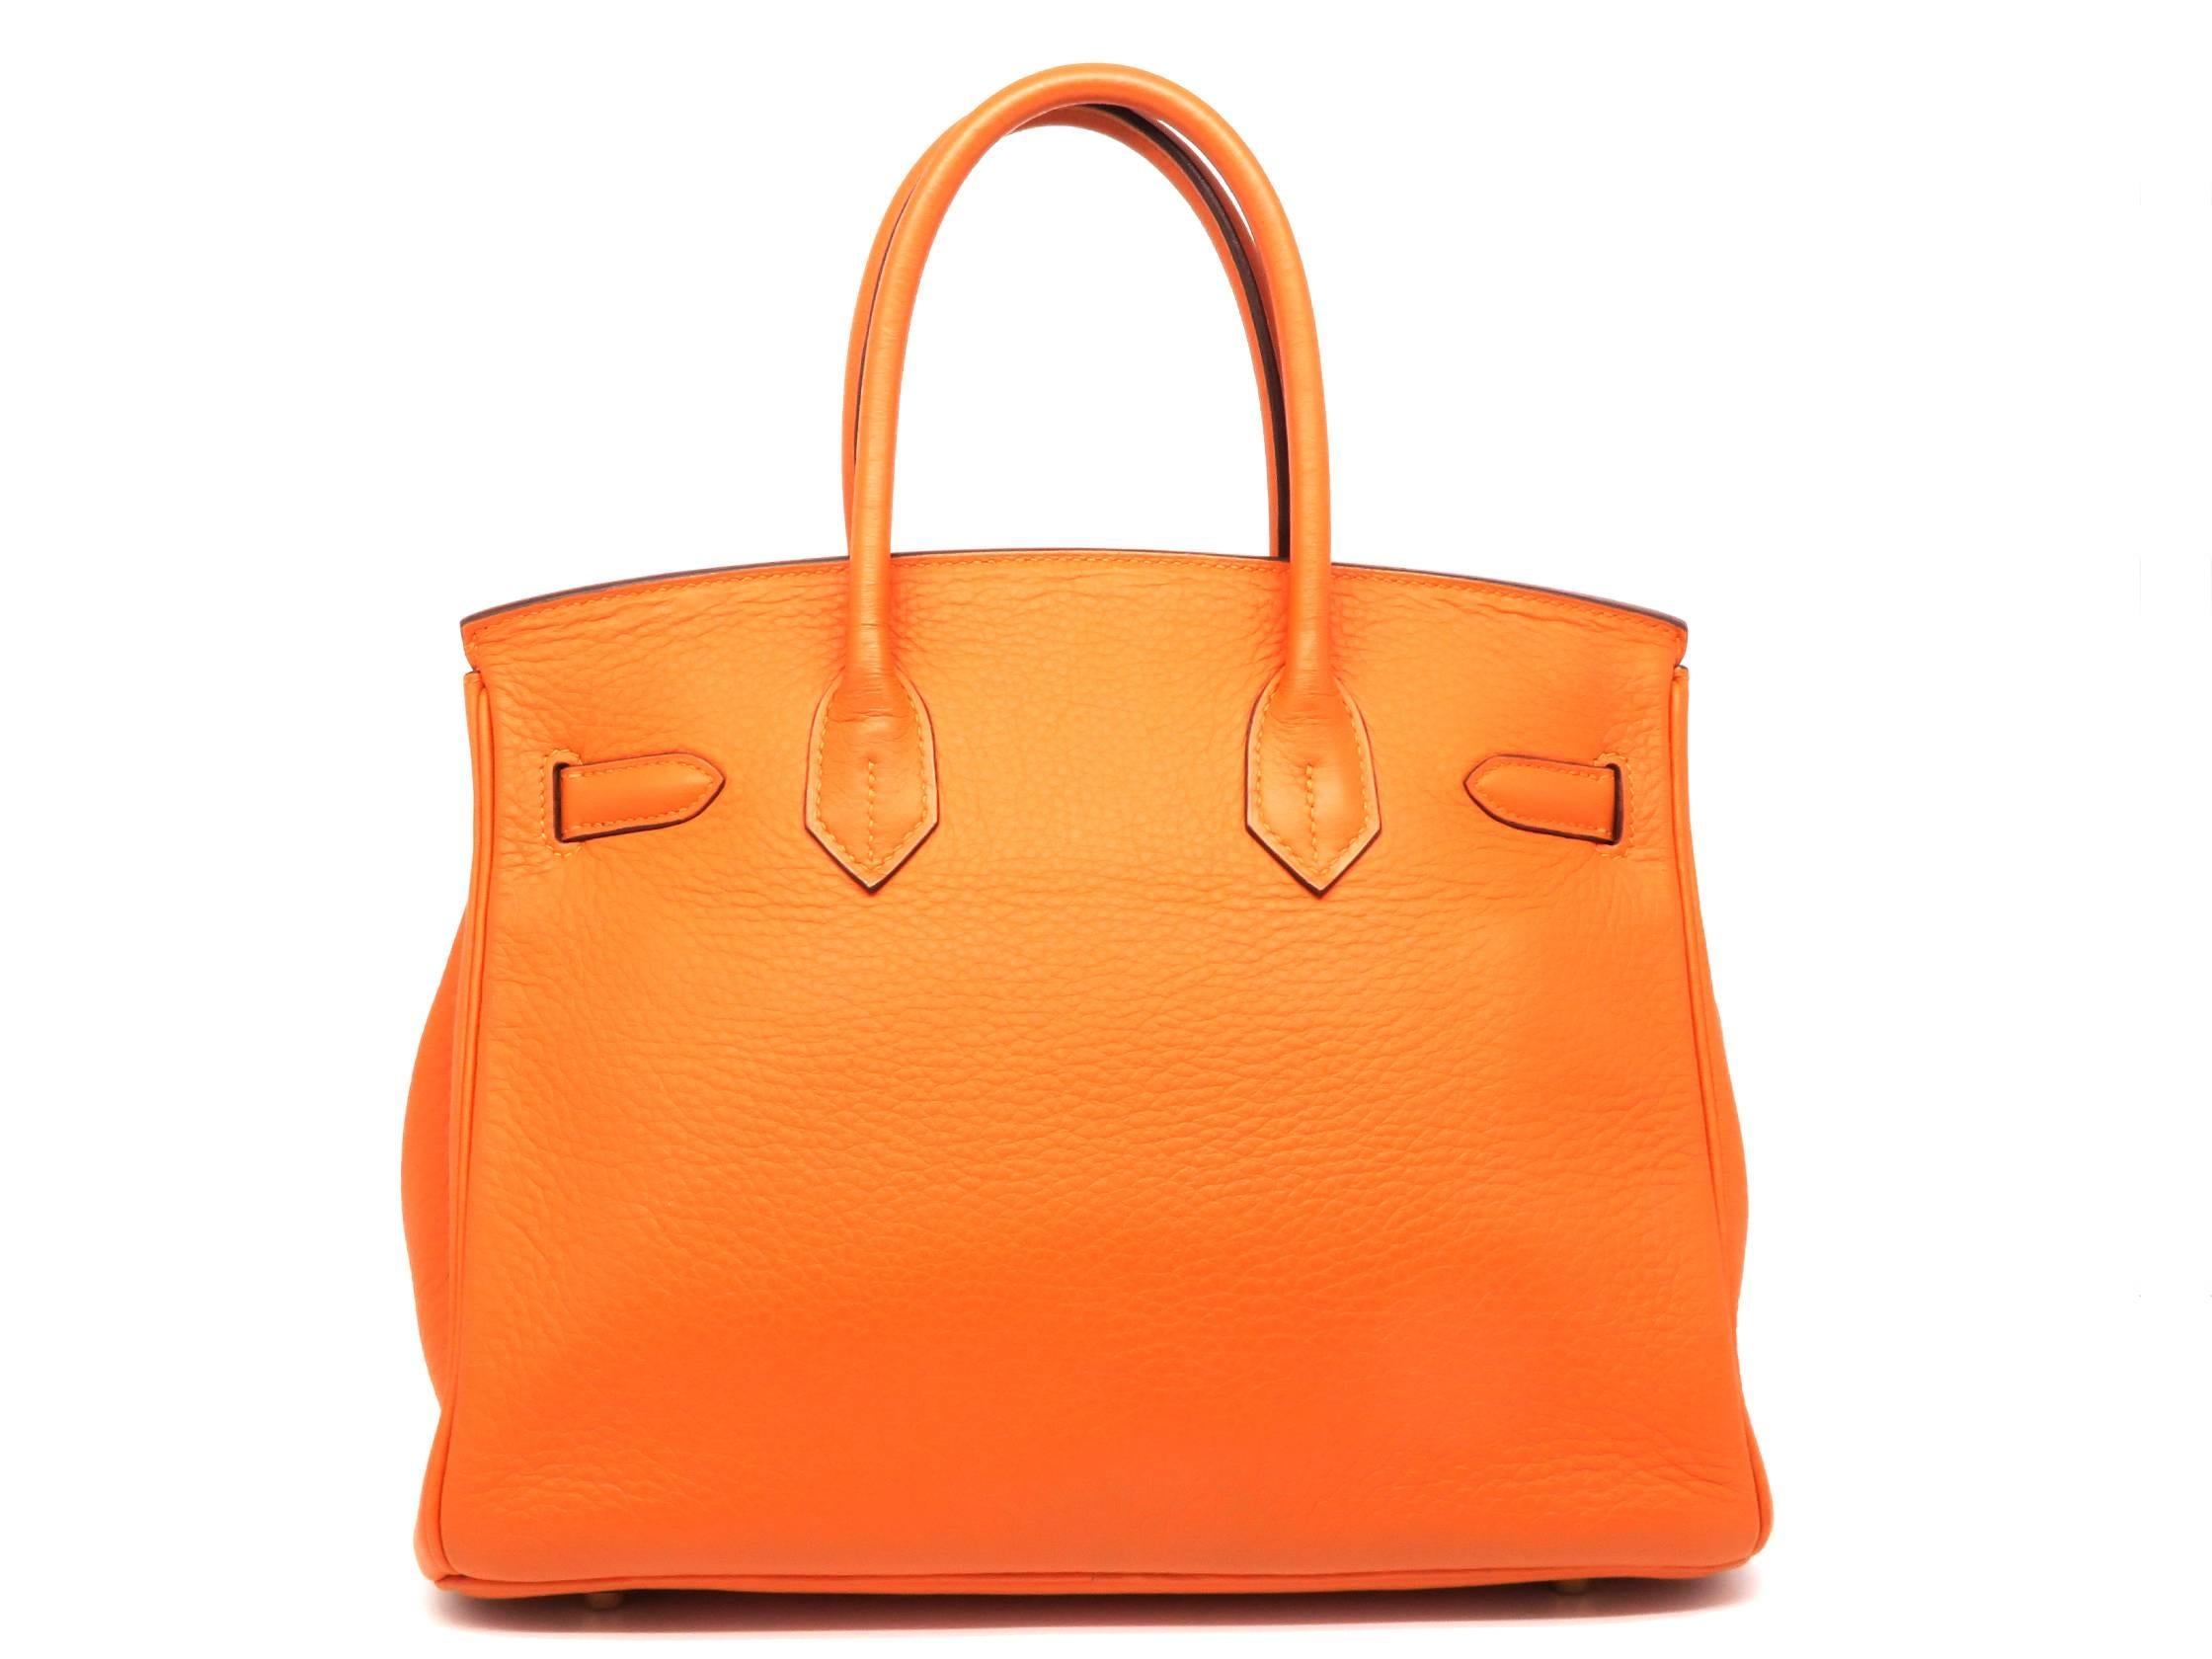 Hermes Birkin 30 Orange Taurillon Clemence Leather GHW Top Handle Bag In Good Condition For Sale In Kowloon, HK